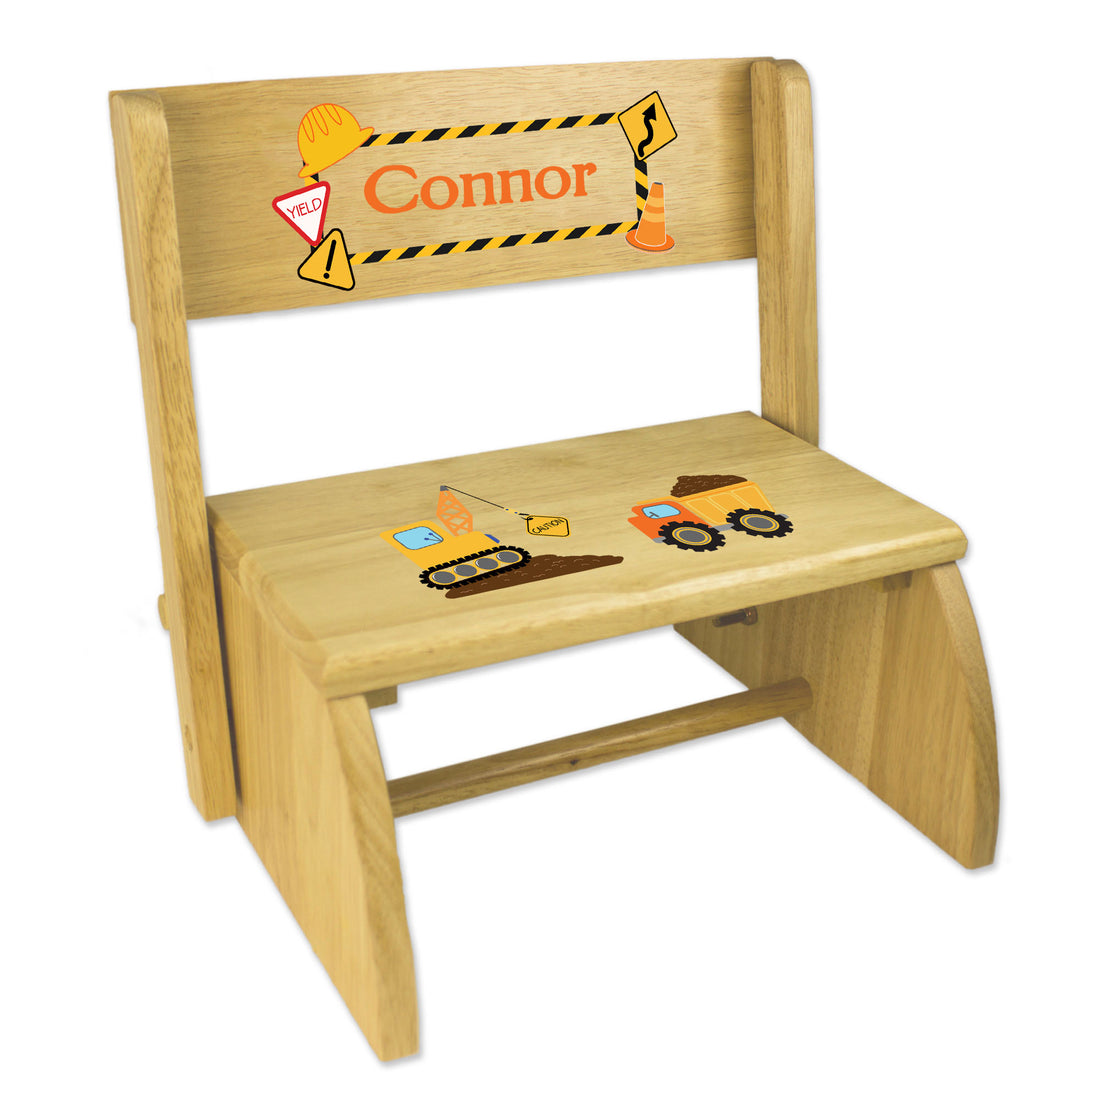 Personalized Construction Childrens And Toddlers Wooden Folding Stool